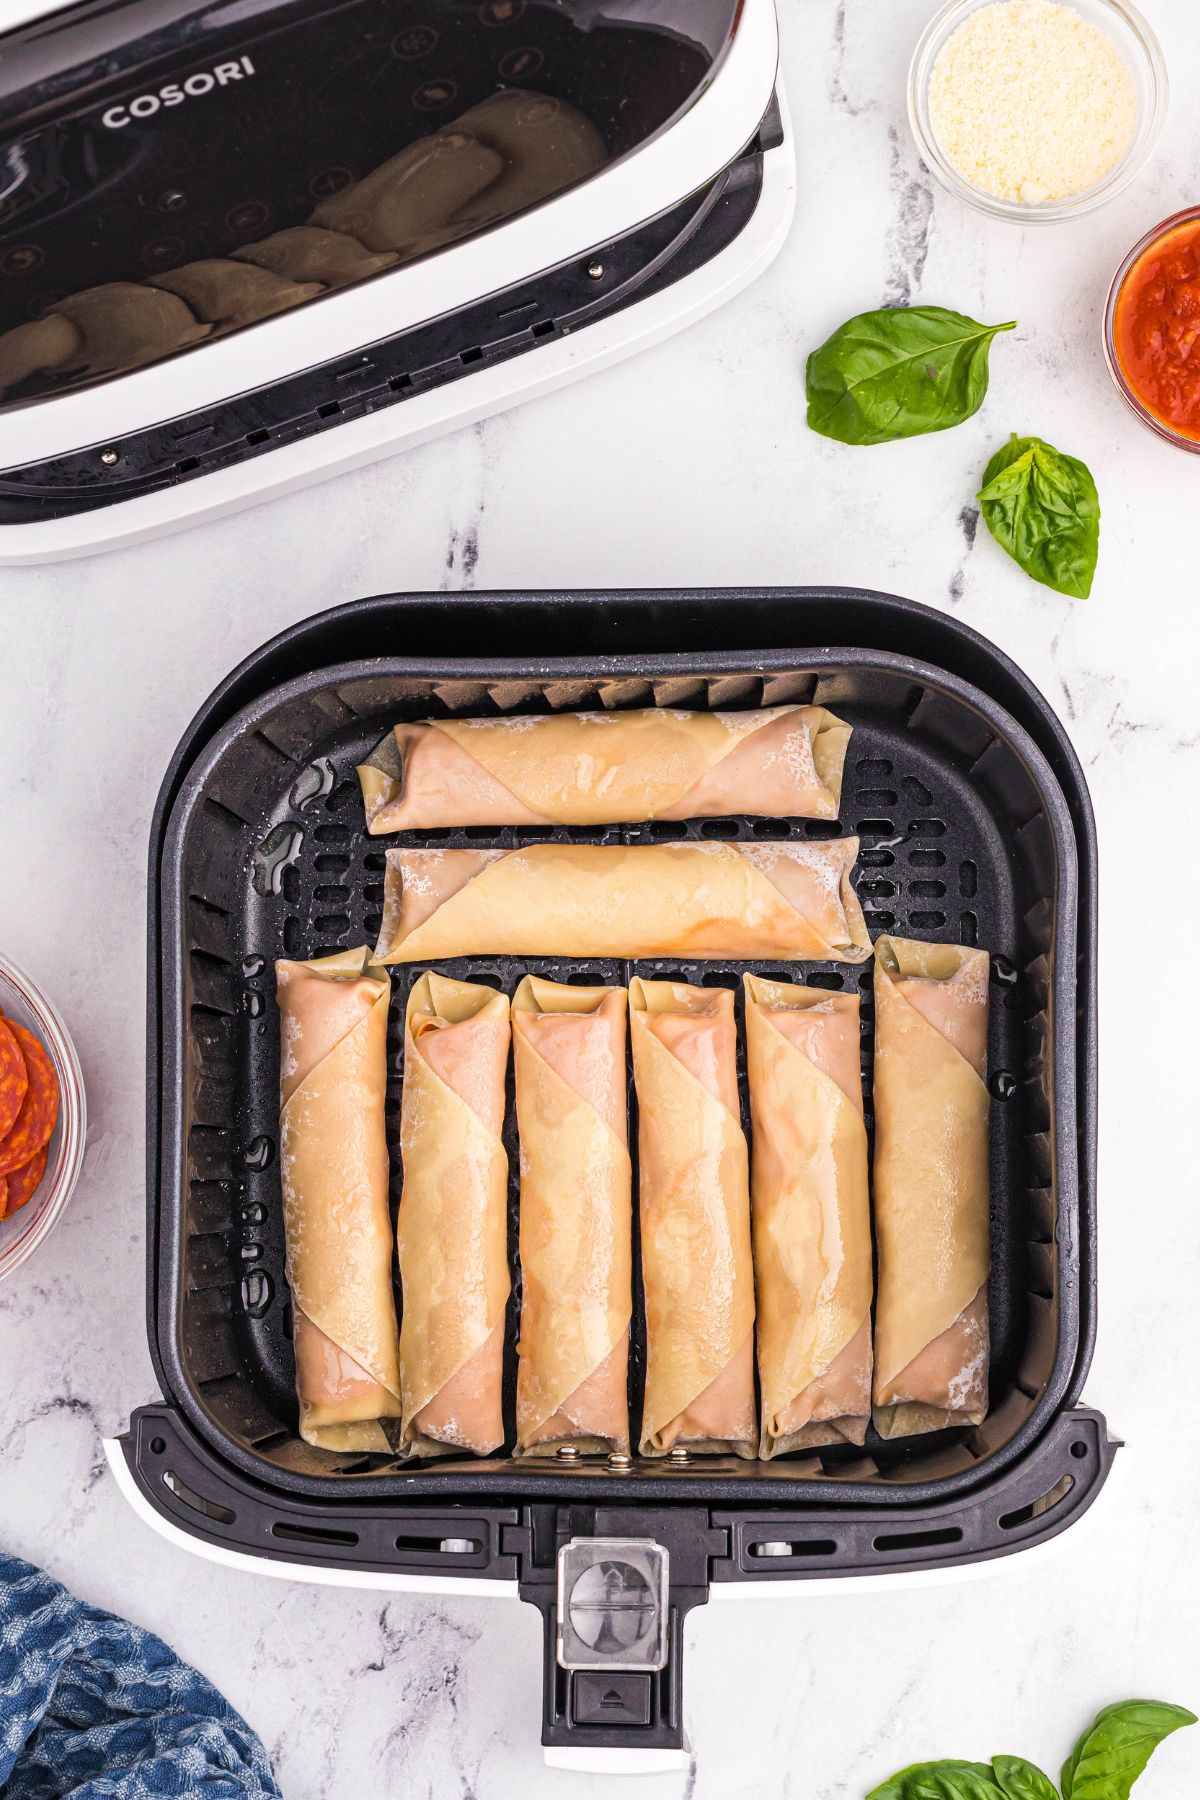 Uncooked rolled egg rolls in the air fryer basket